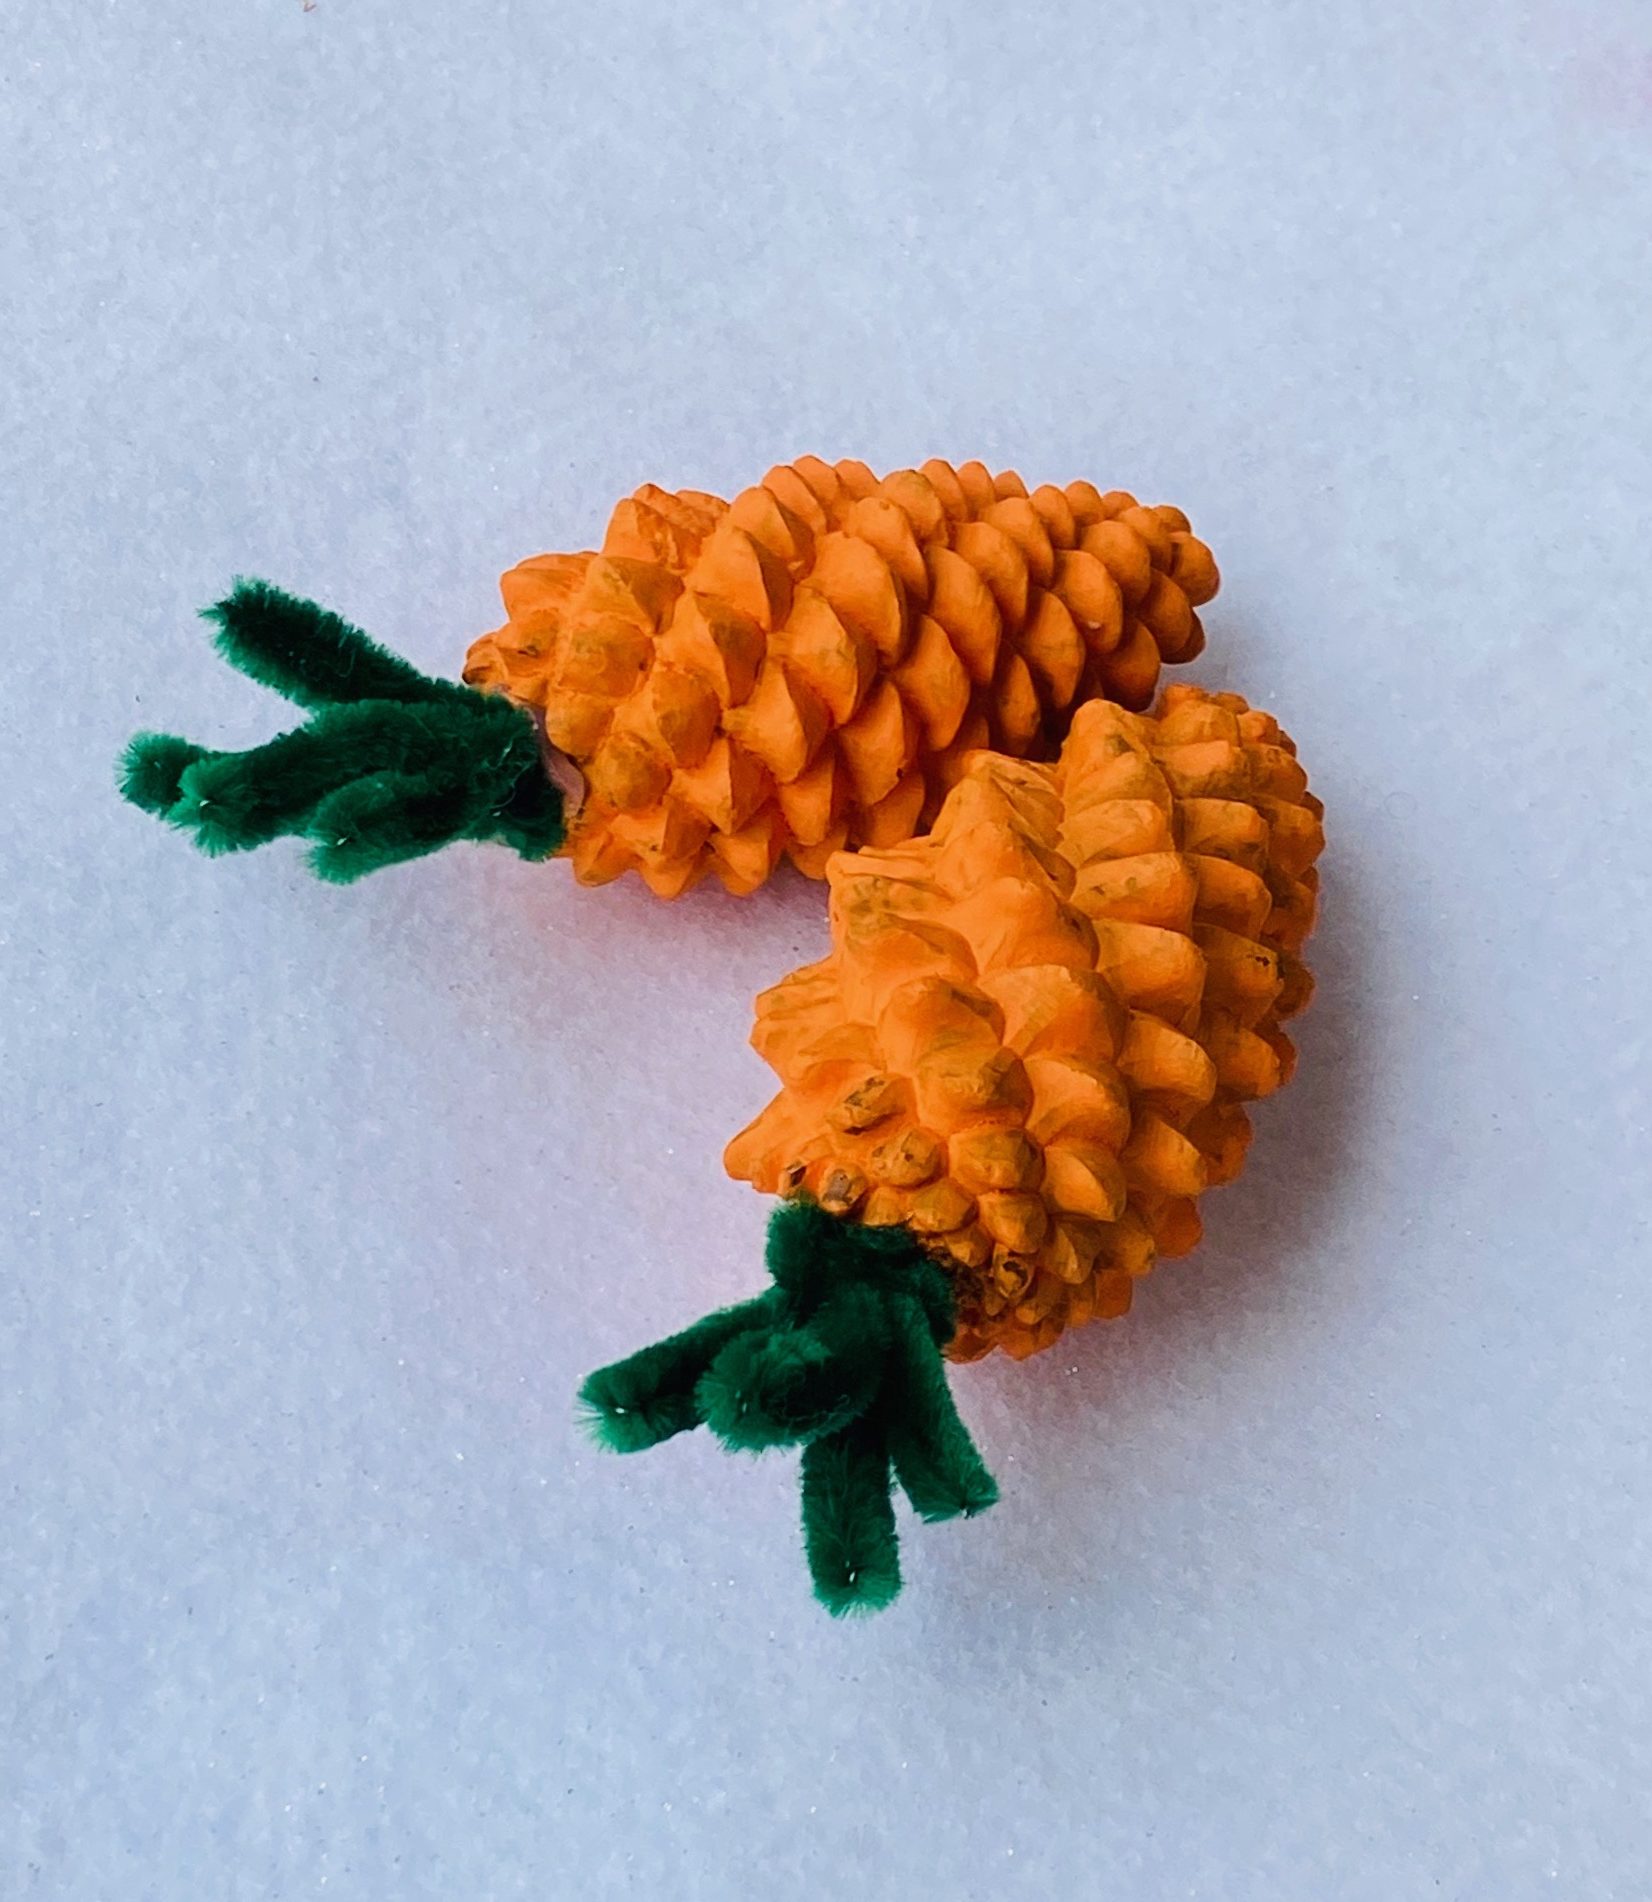 How to Make a Carrot from a Styrofoam Cone - My Eclectic Treasures